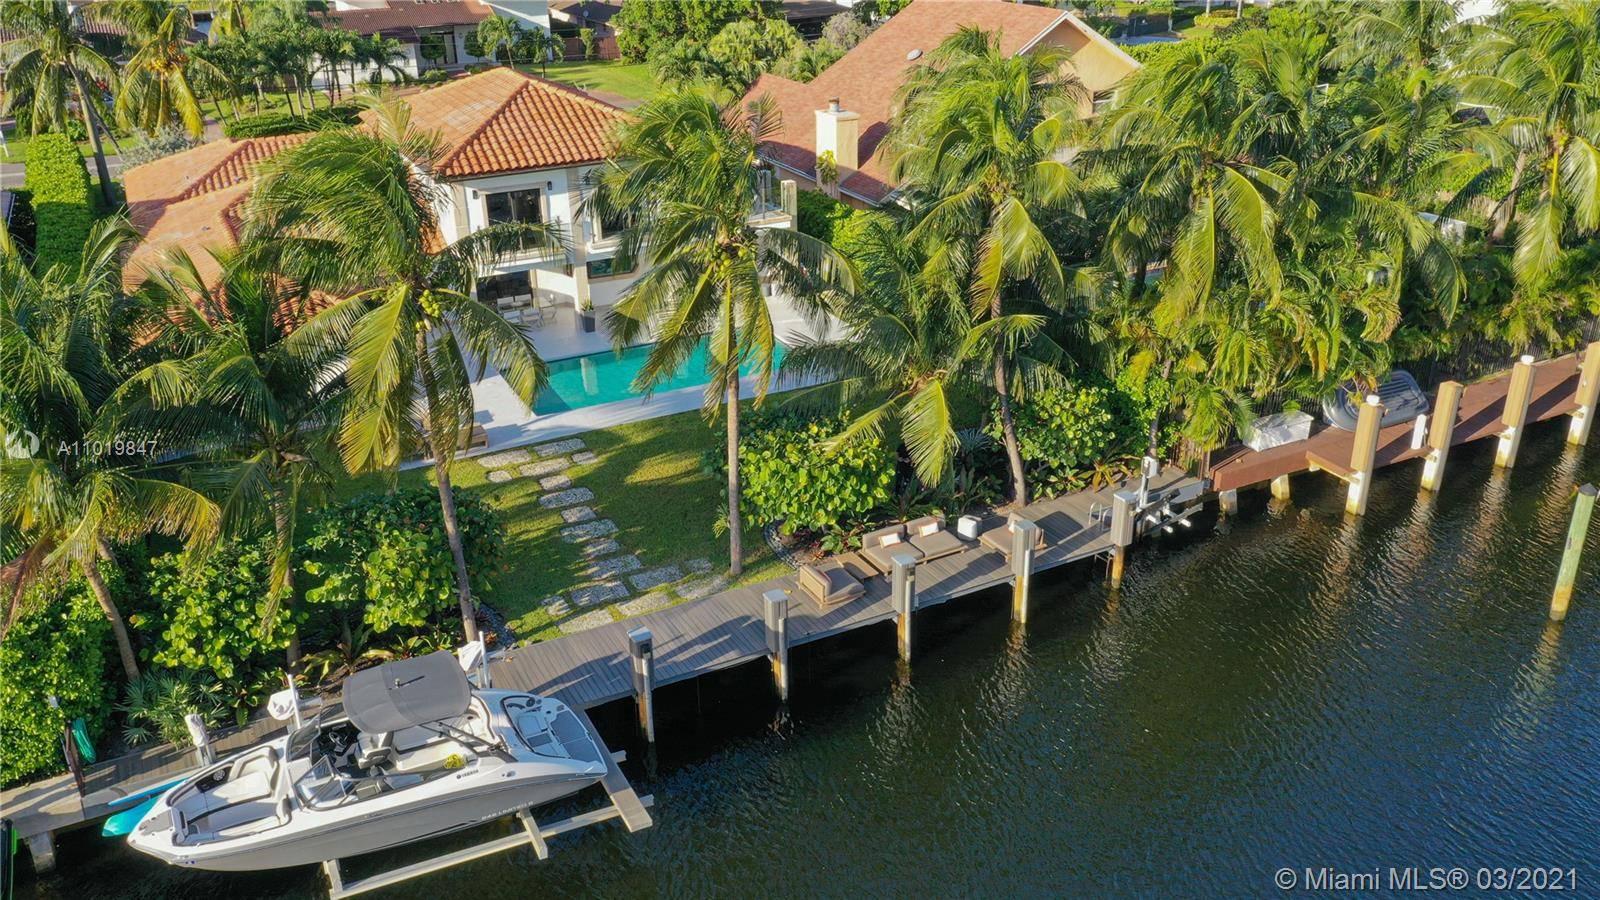 LIVE in paradise, ideal for boaters, with a new long dock, with 3 lifts for yachts.